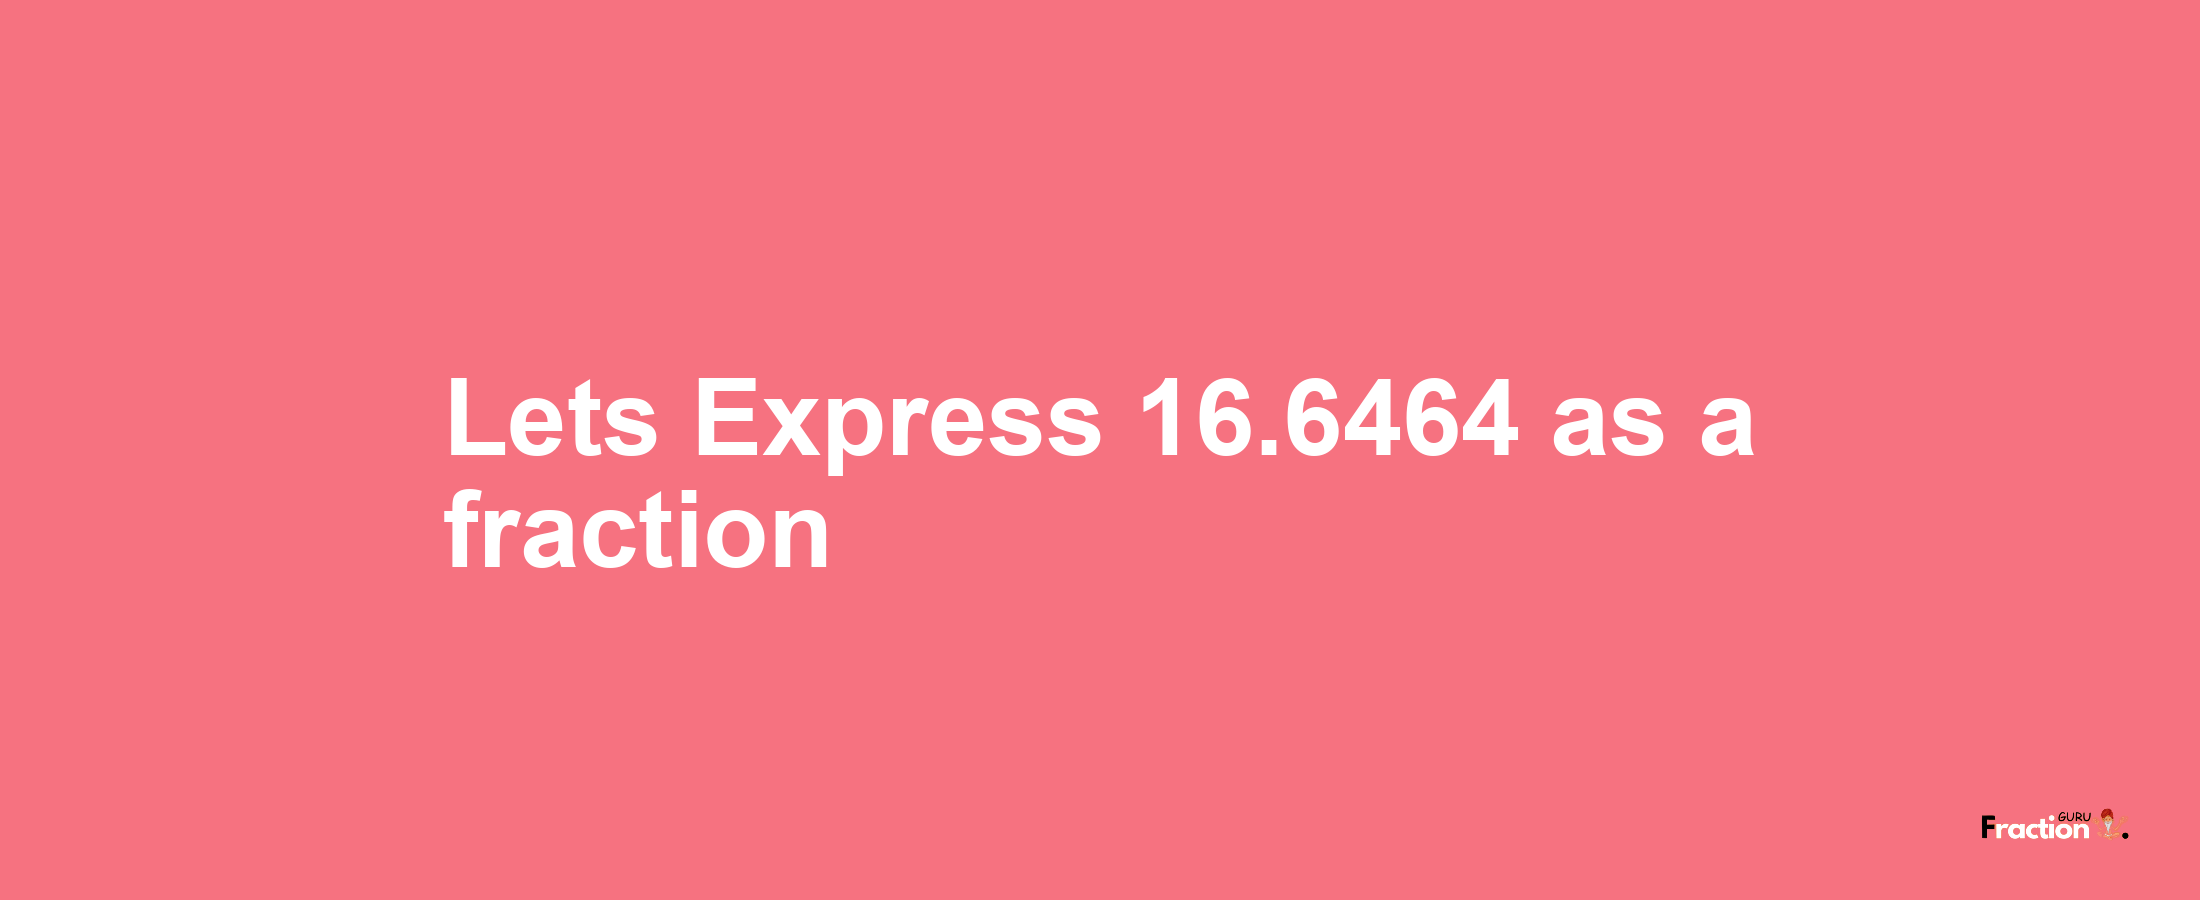 Lets Express 16.6464 as afraction